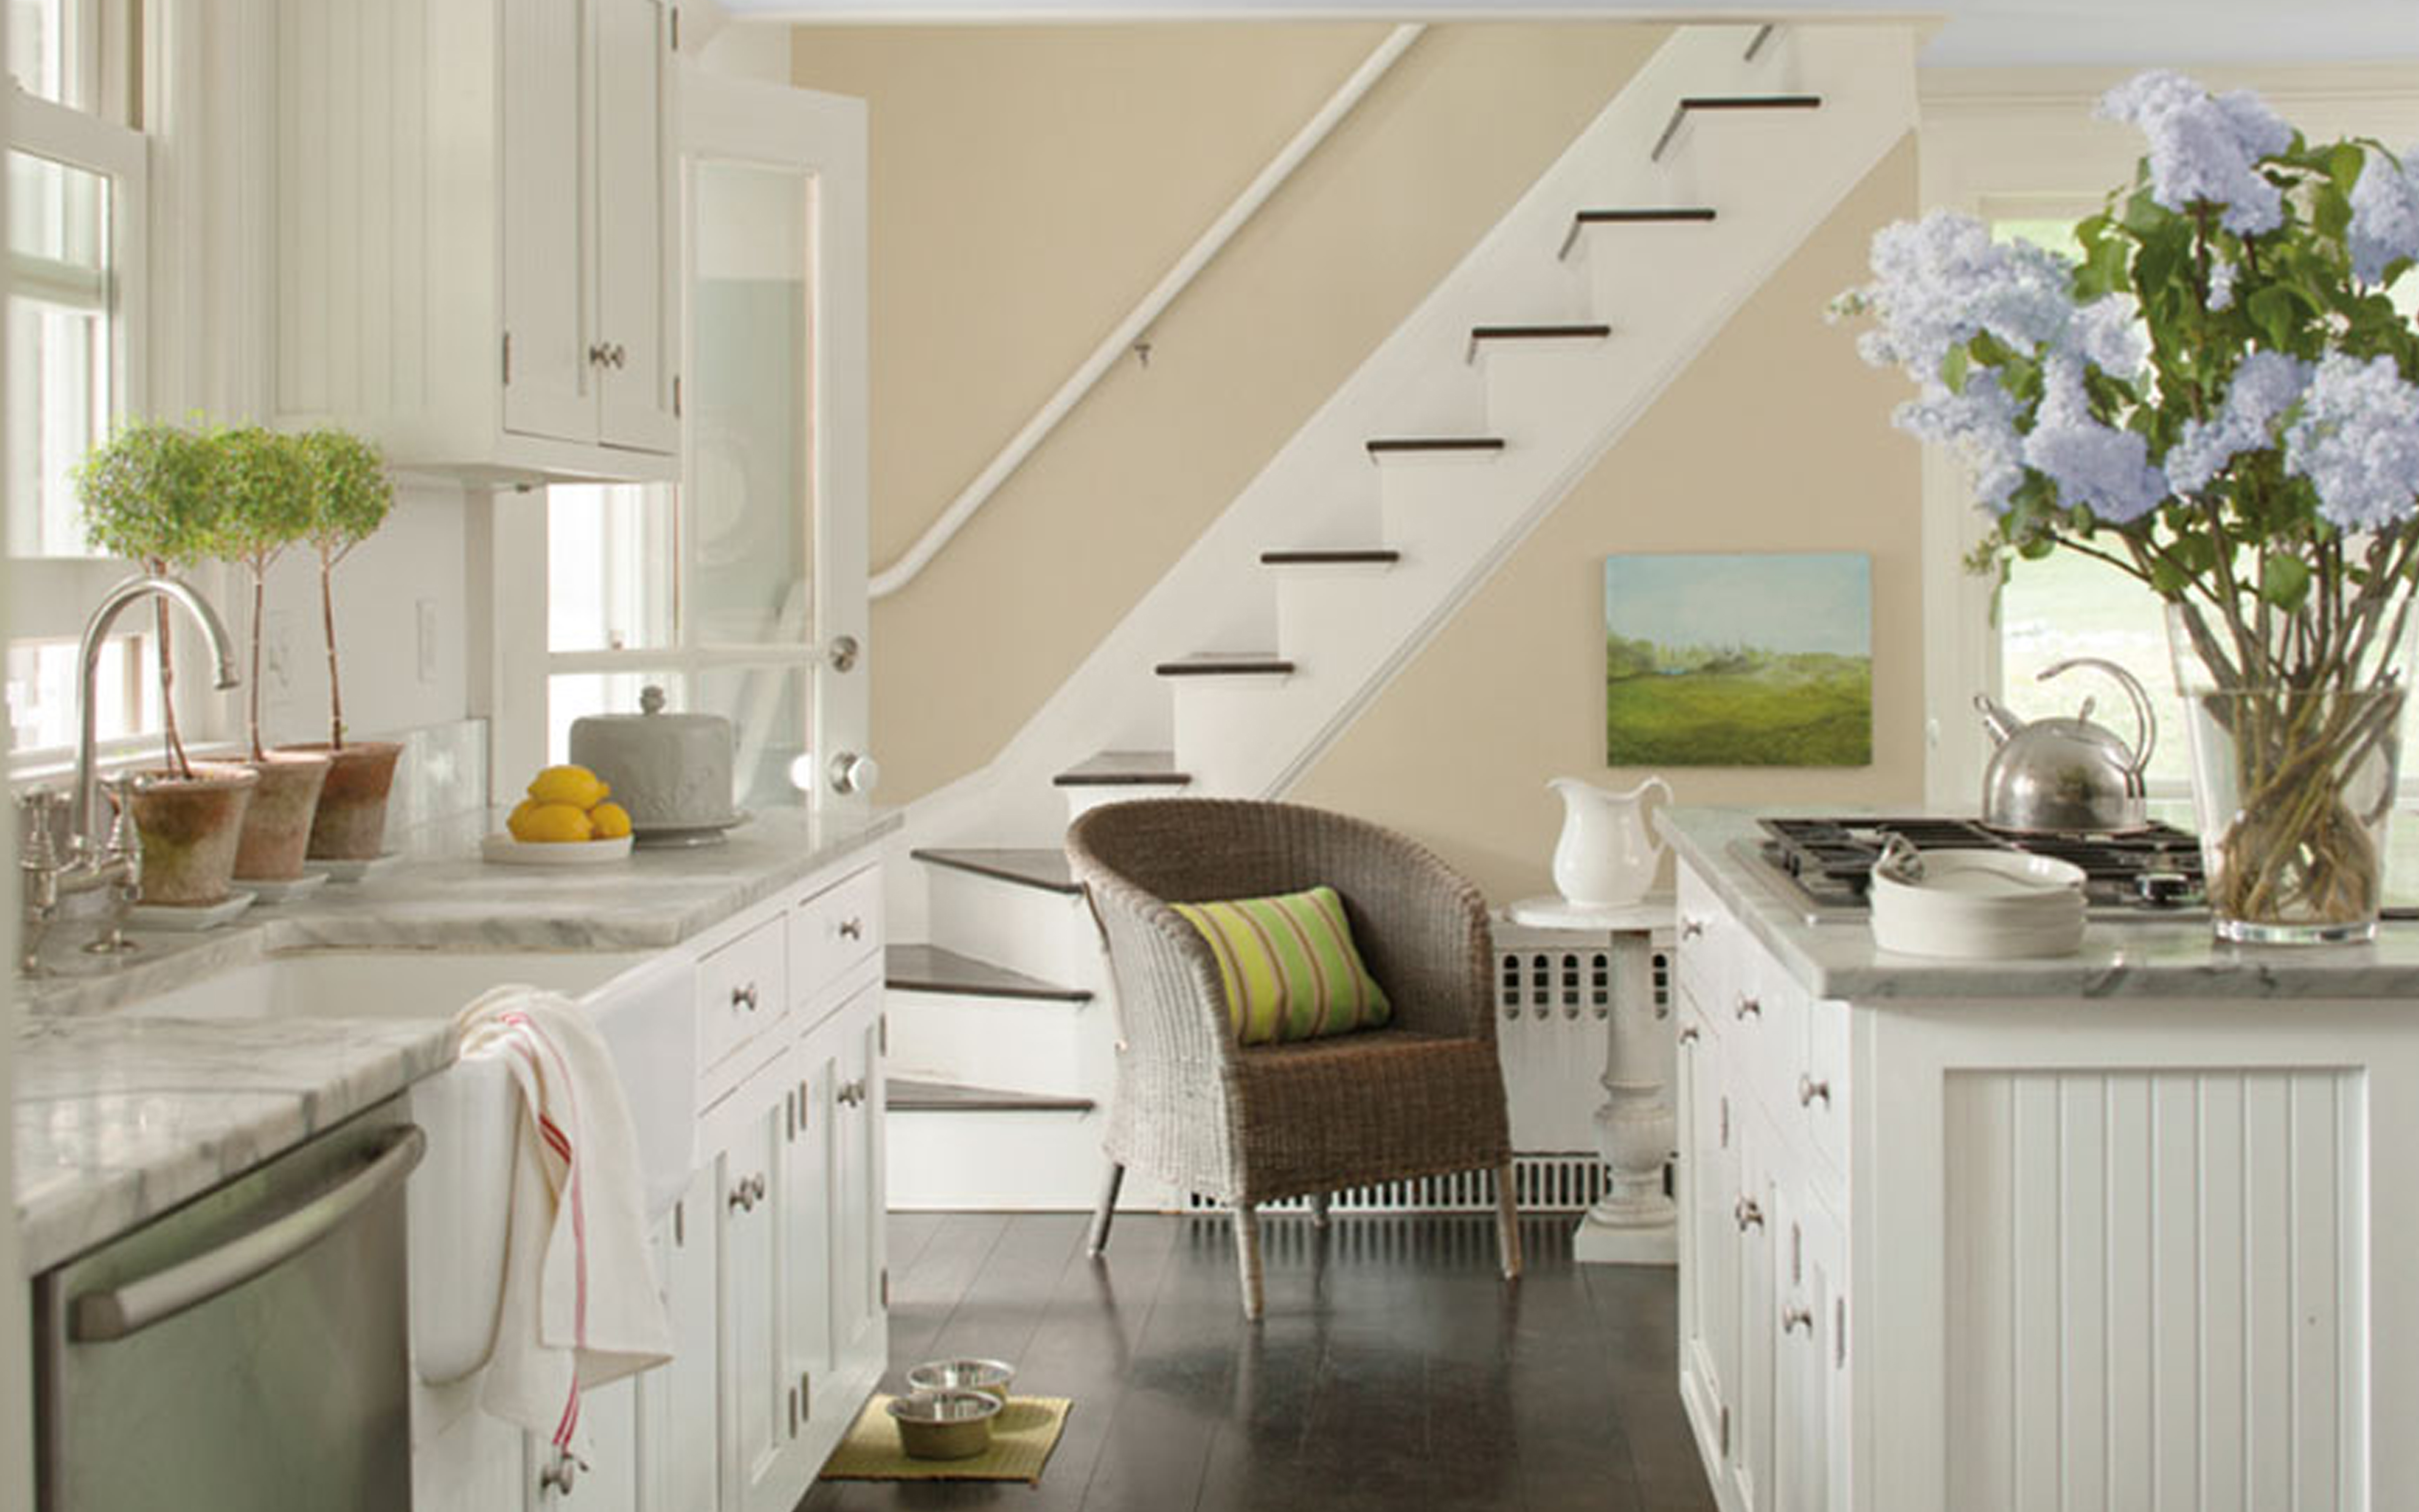 Featured Box Image - Kitchen Benjamin Moore Paint Colors - HD Wallpaper 